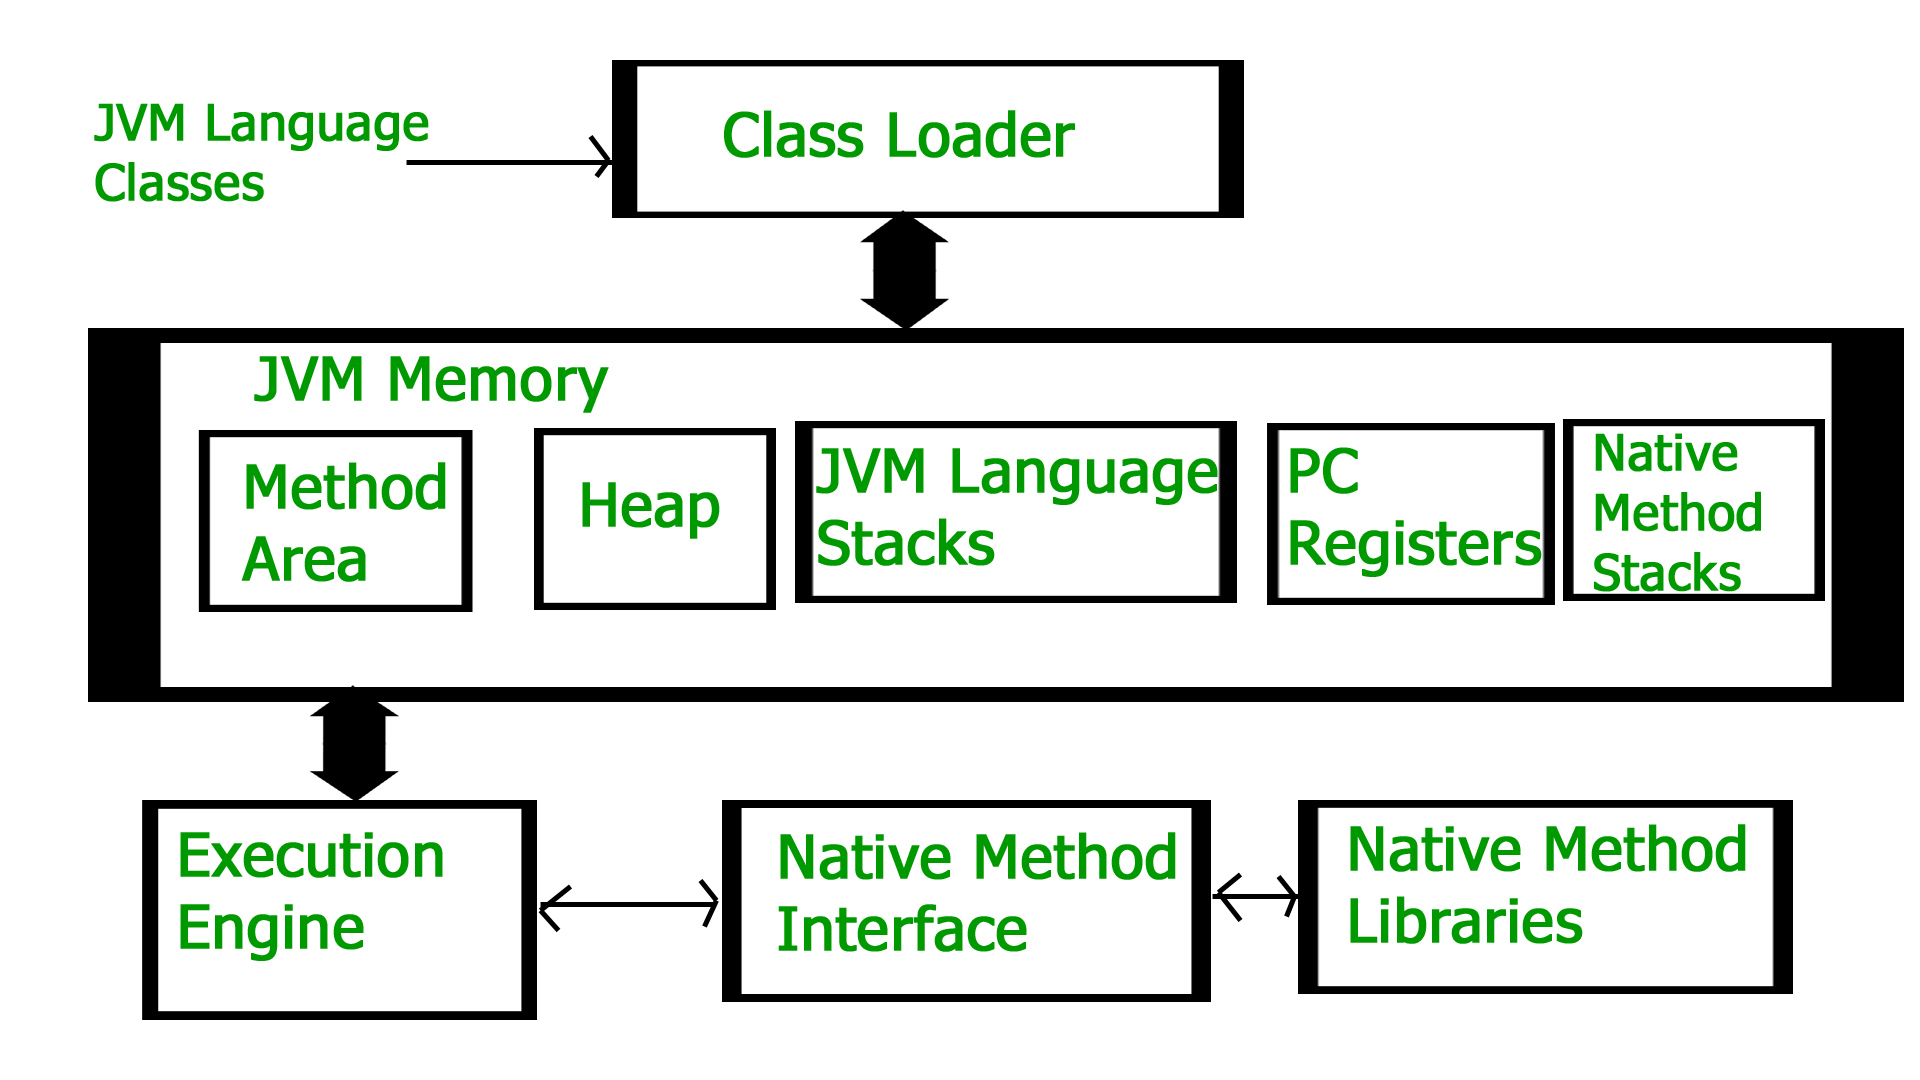 How to tune the heap utilization of the JVM